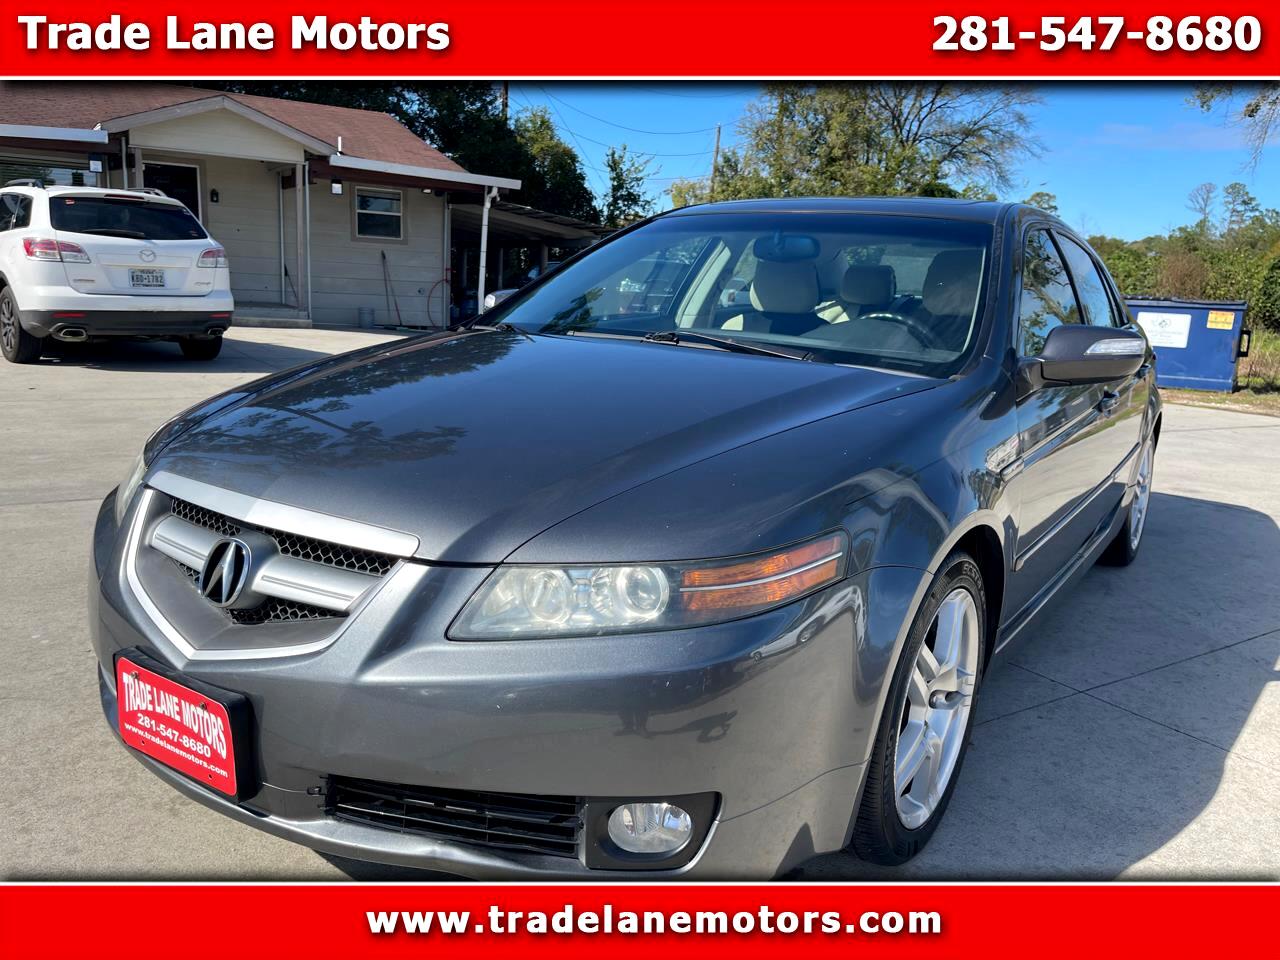 2008 Acura TL 5-Speed AT with Navigation System